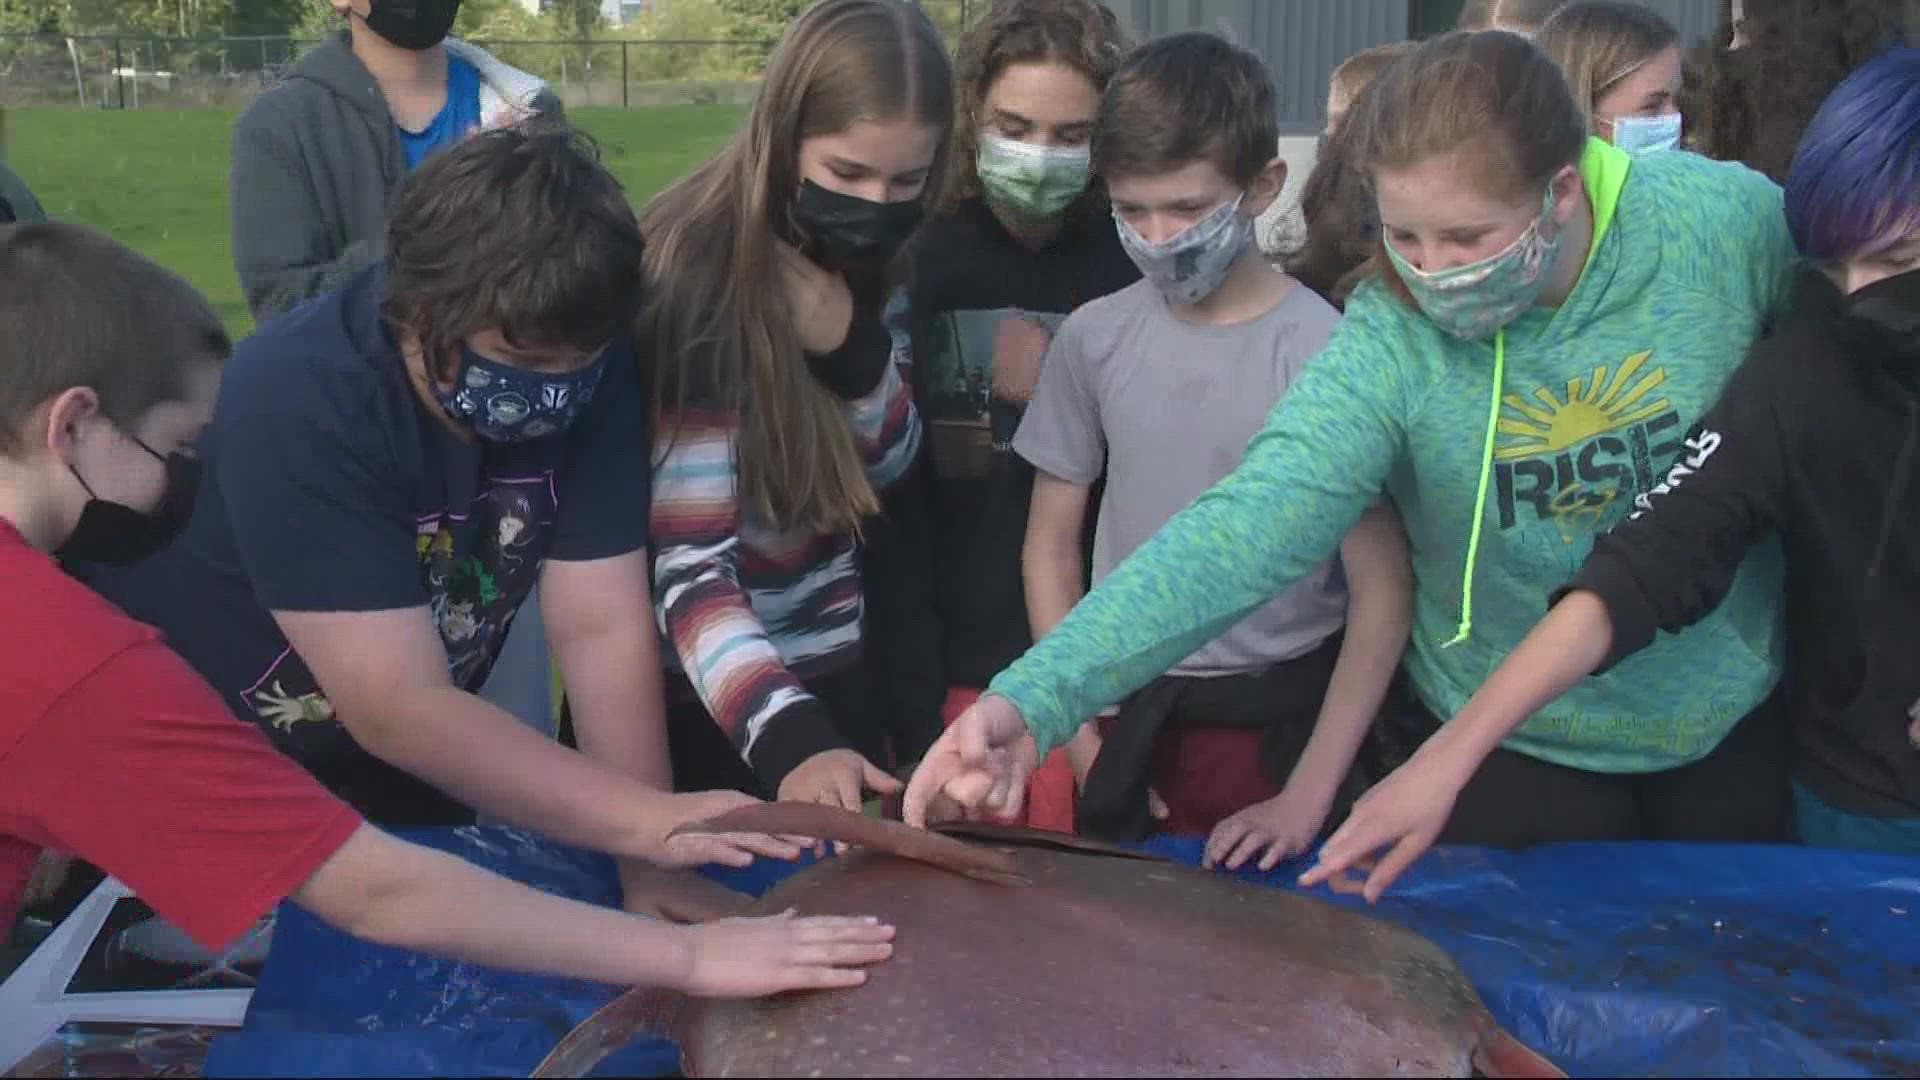 Opah fish are normally found deep in warm waters like off the coast of Hawaii. Students at Warrenton Middle School have been learning all about the tropical fish.